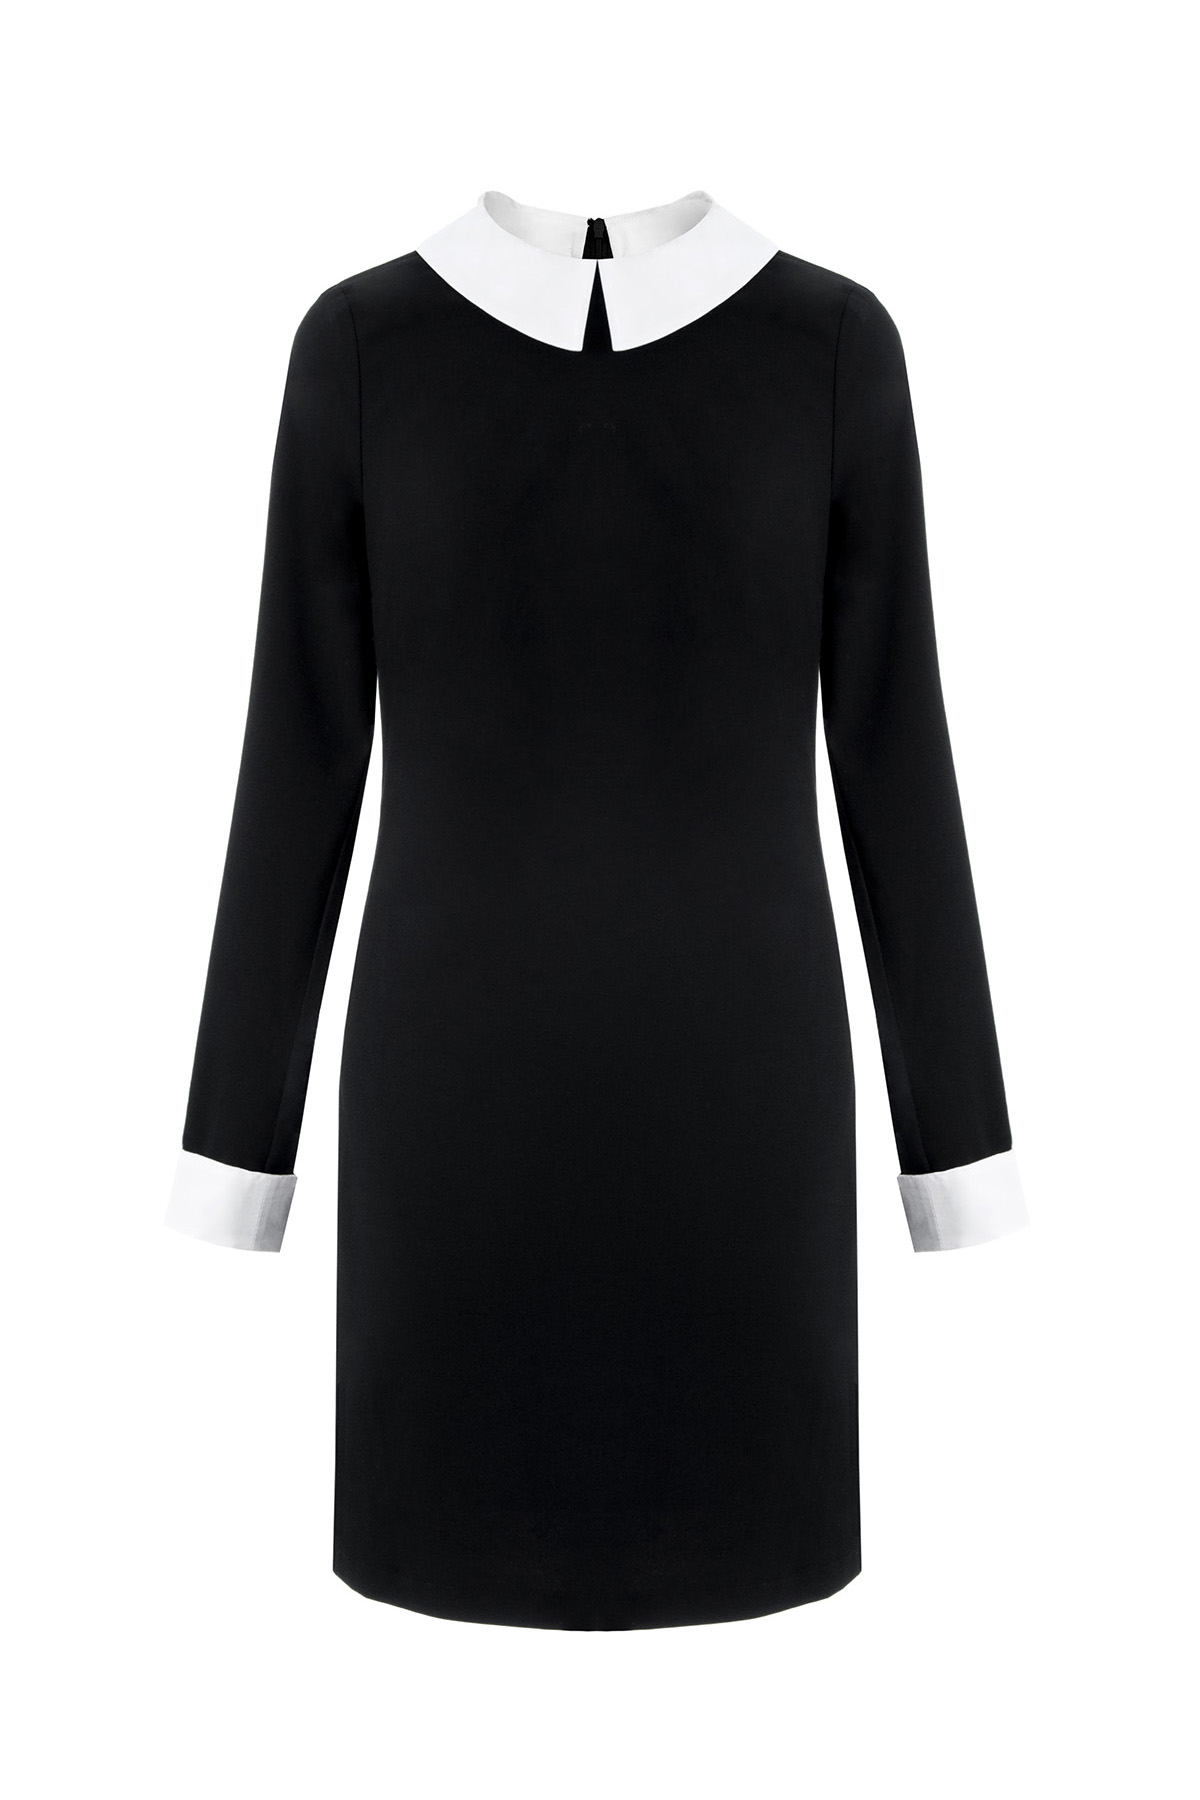 Black dress with a white collar, photo 6